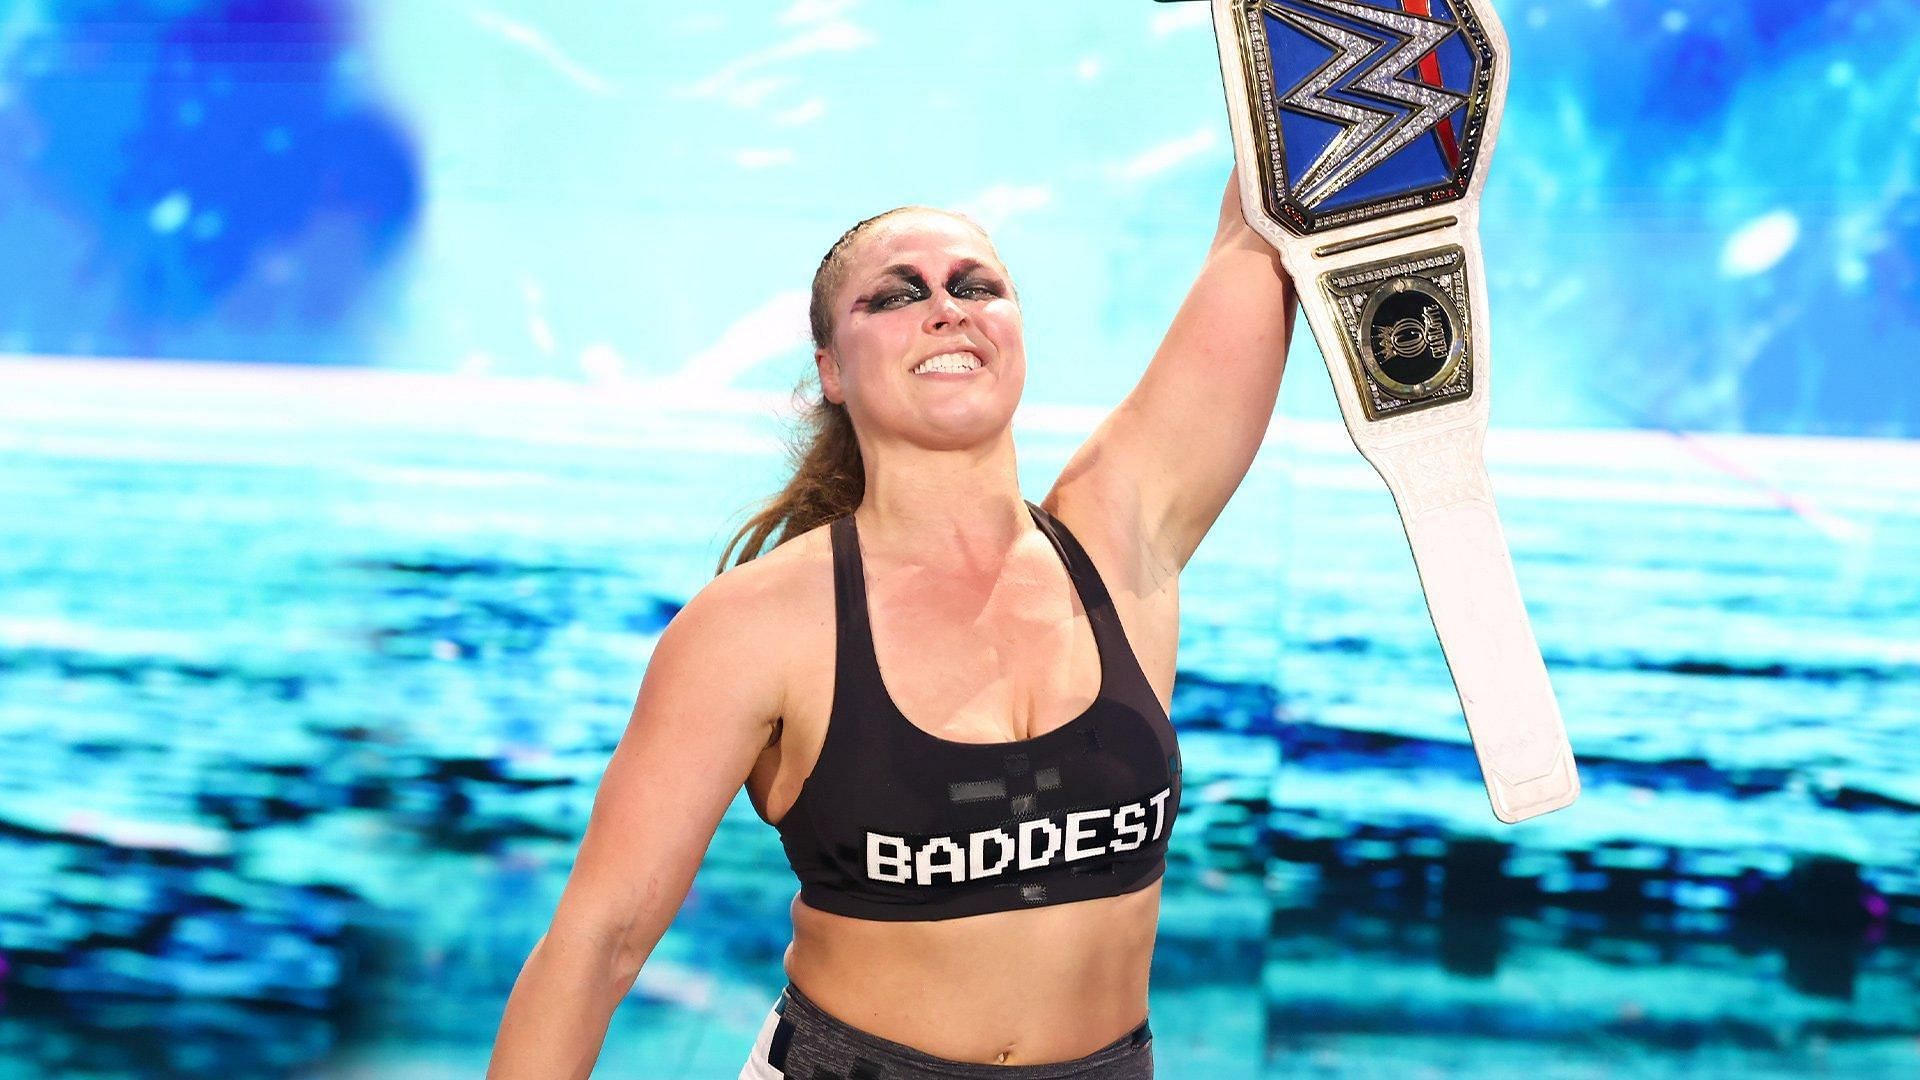 Who will challenge Ronda Rousey at Hell in a Cell?